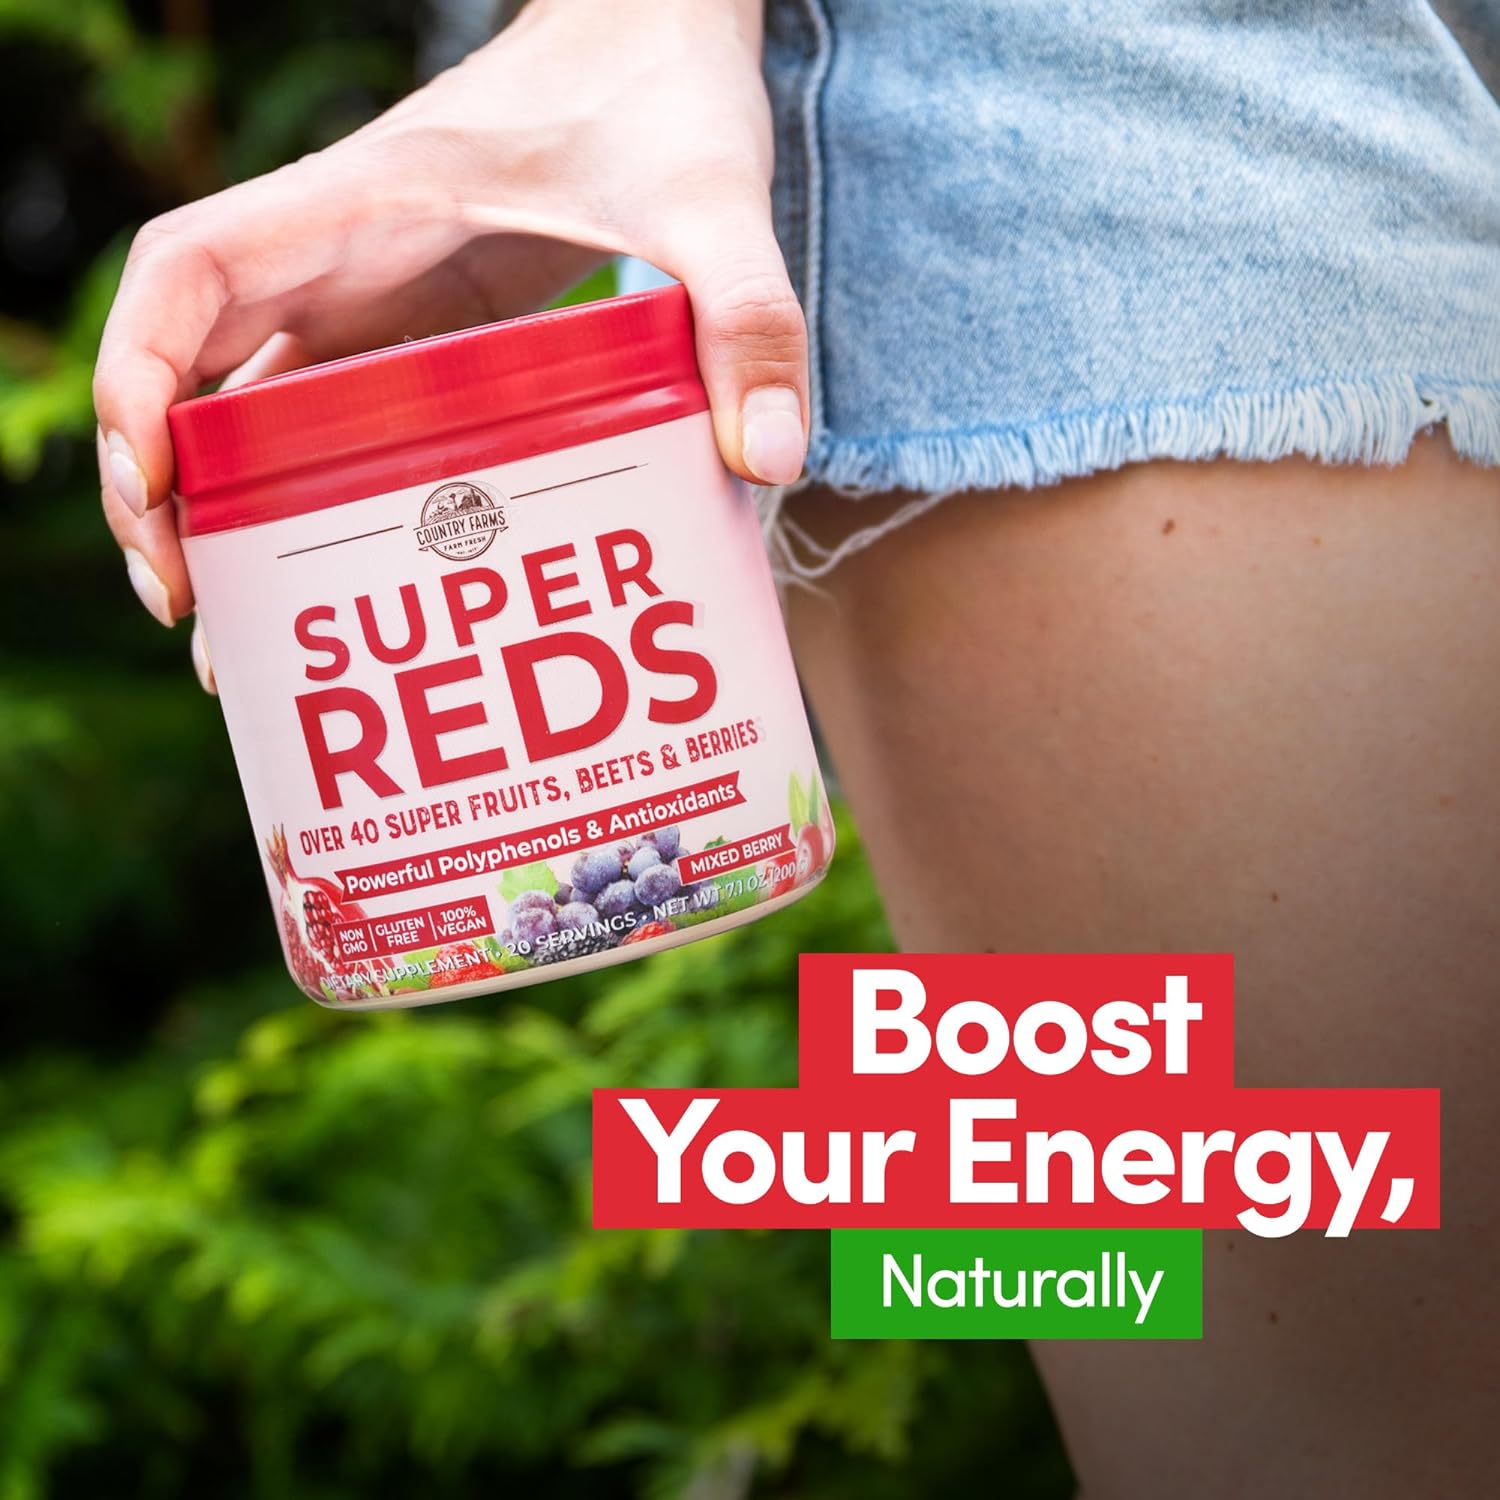 COUNTRY FARMS Super Reds, Energizing Polyphenol Superfood, Over 40 Sup